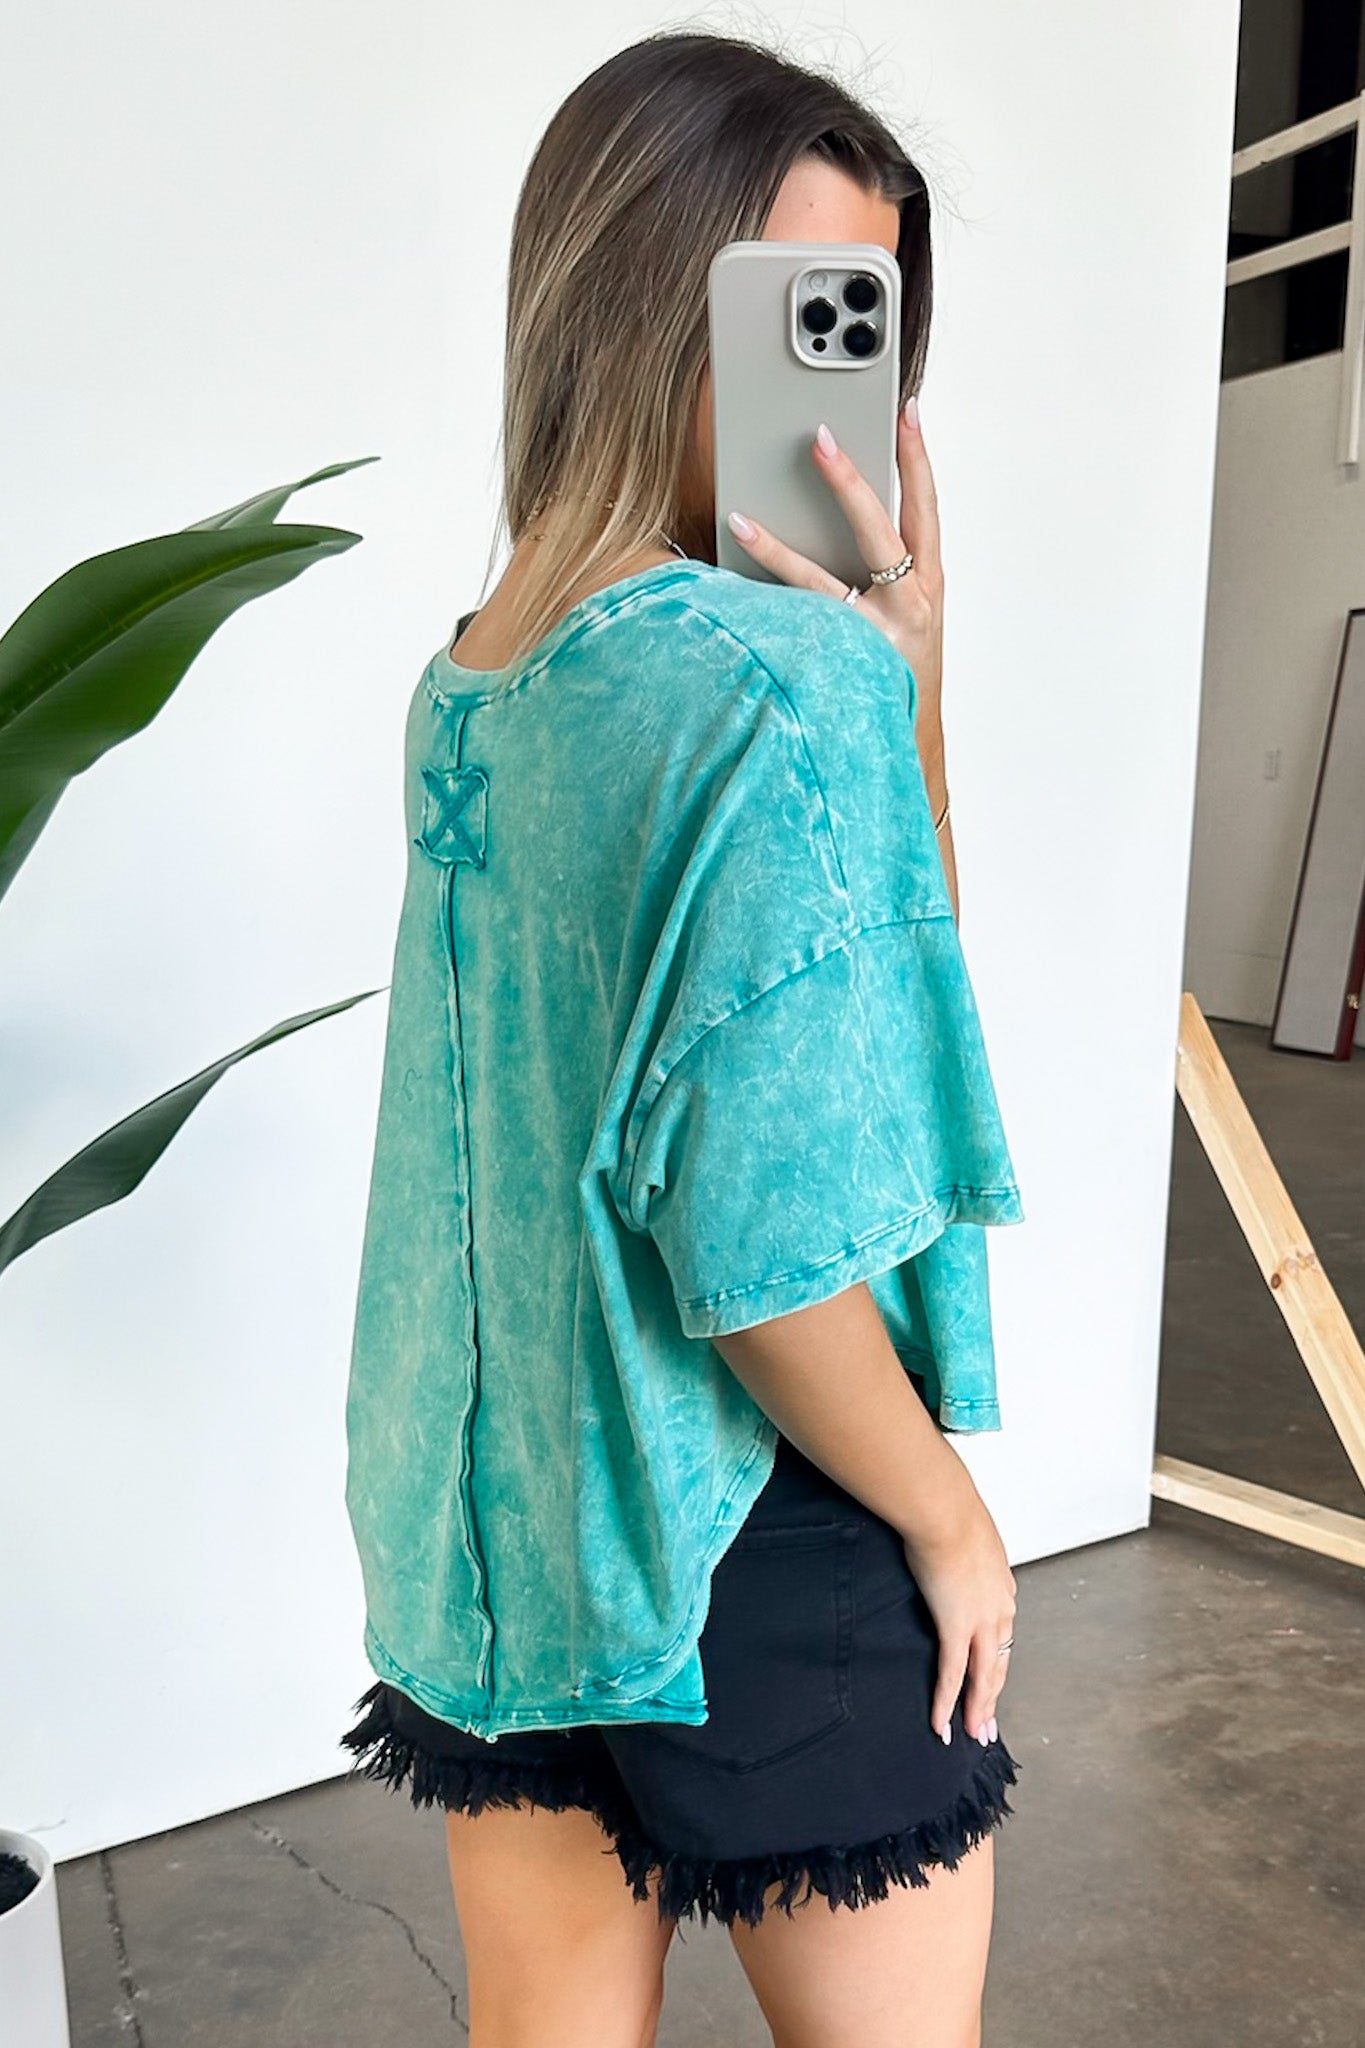  Senoia Mineral Washed Relaxed Fit Top - BACK IN STOCK - Madison and Mallory